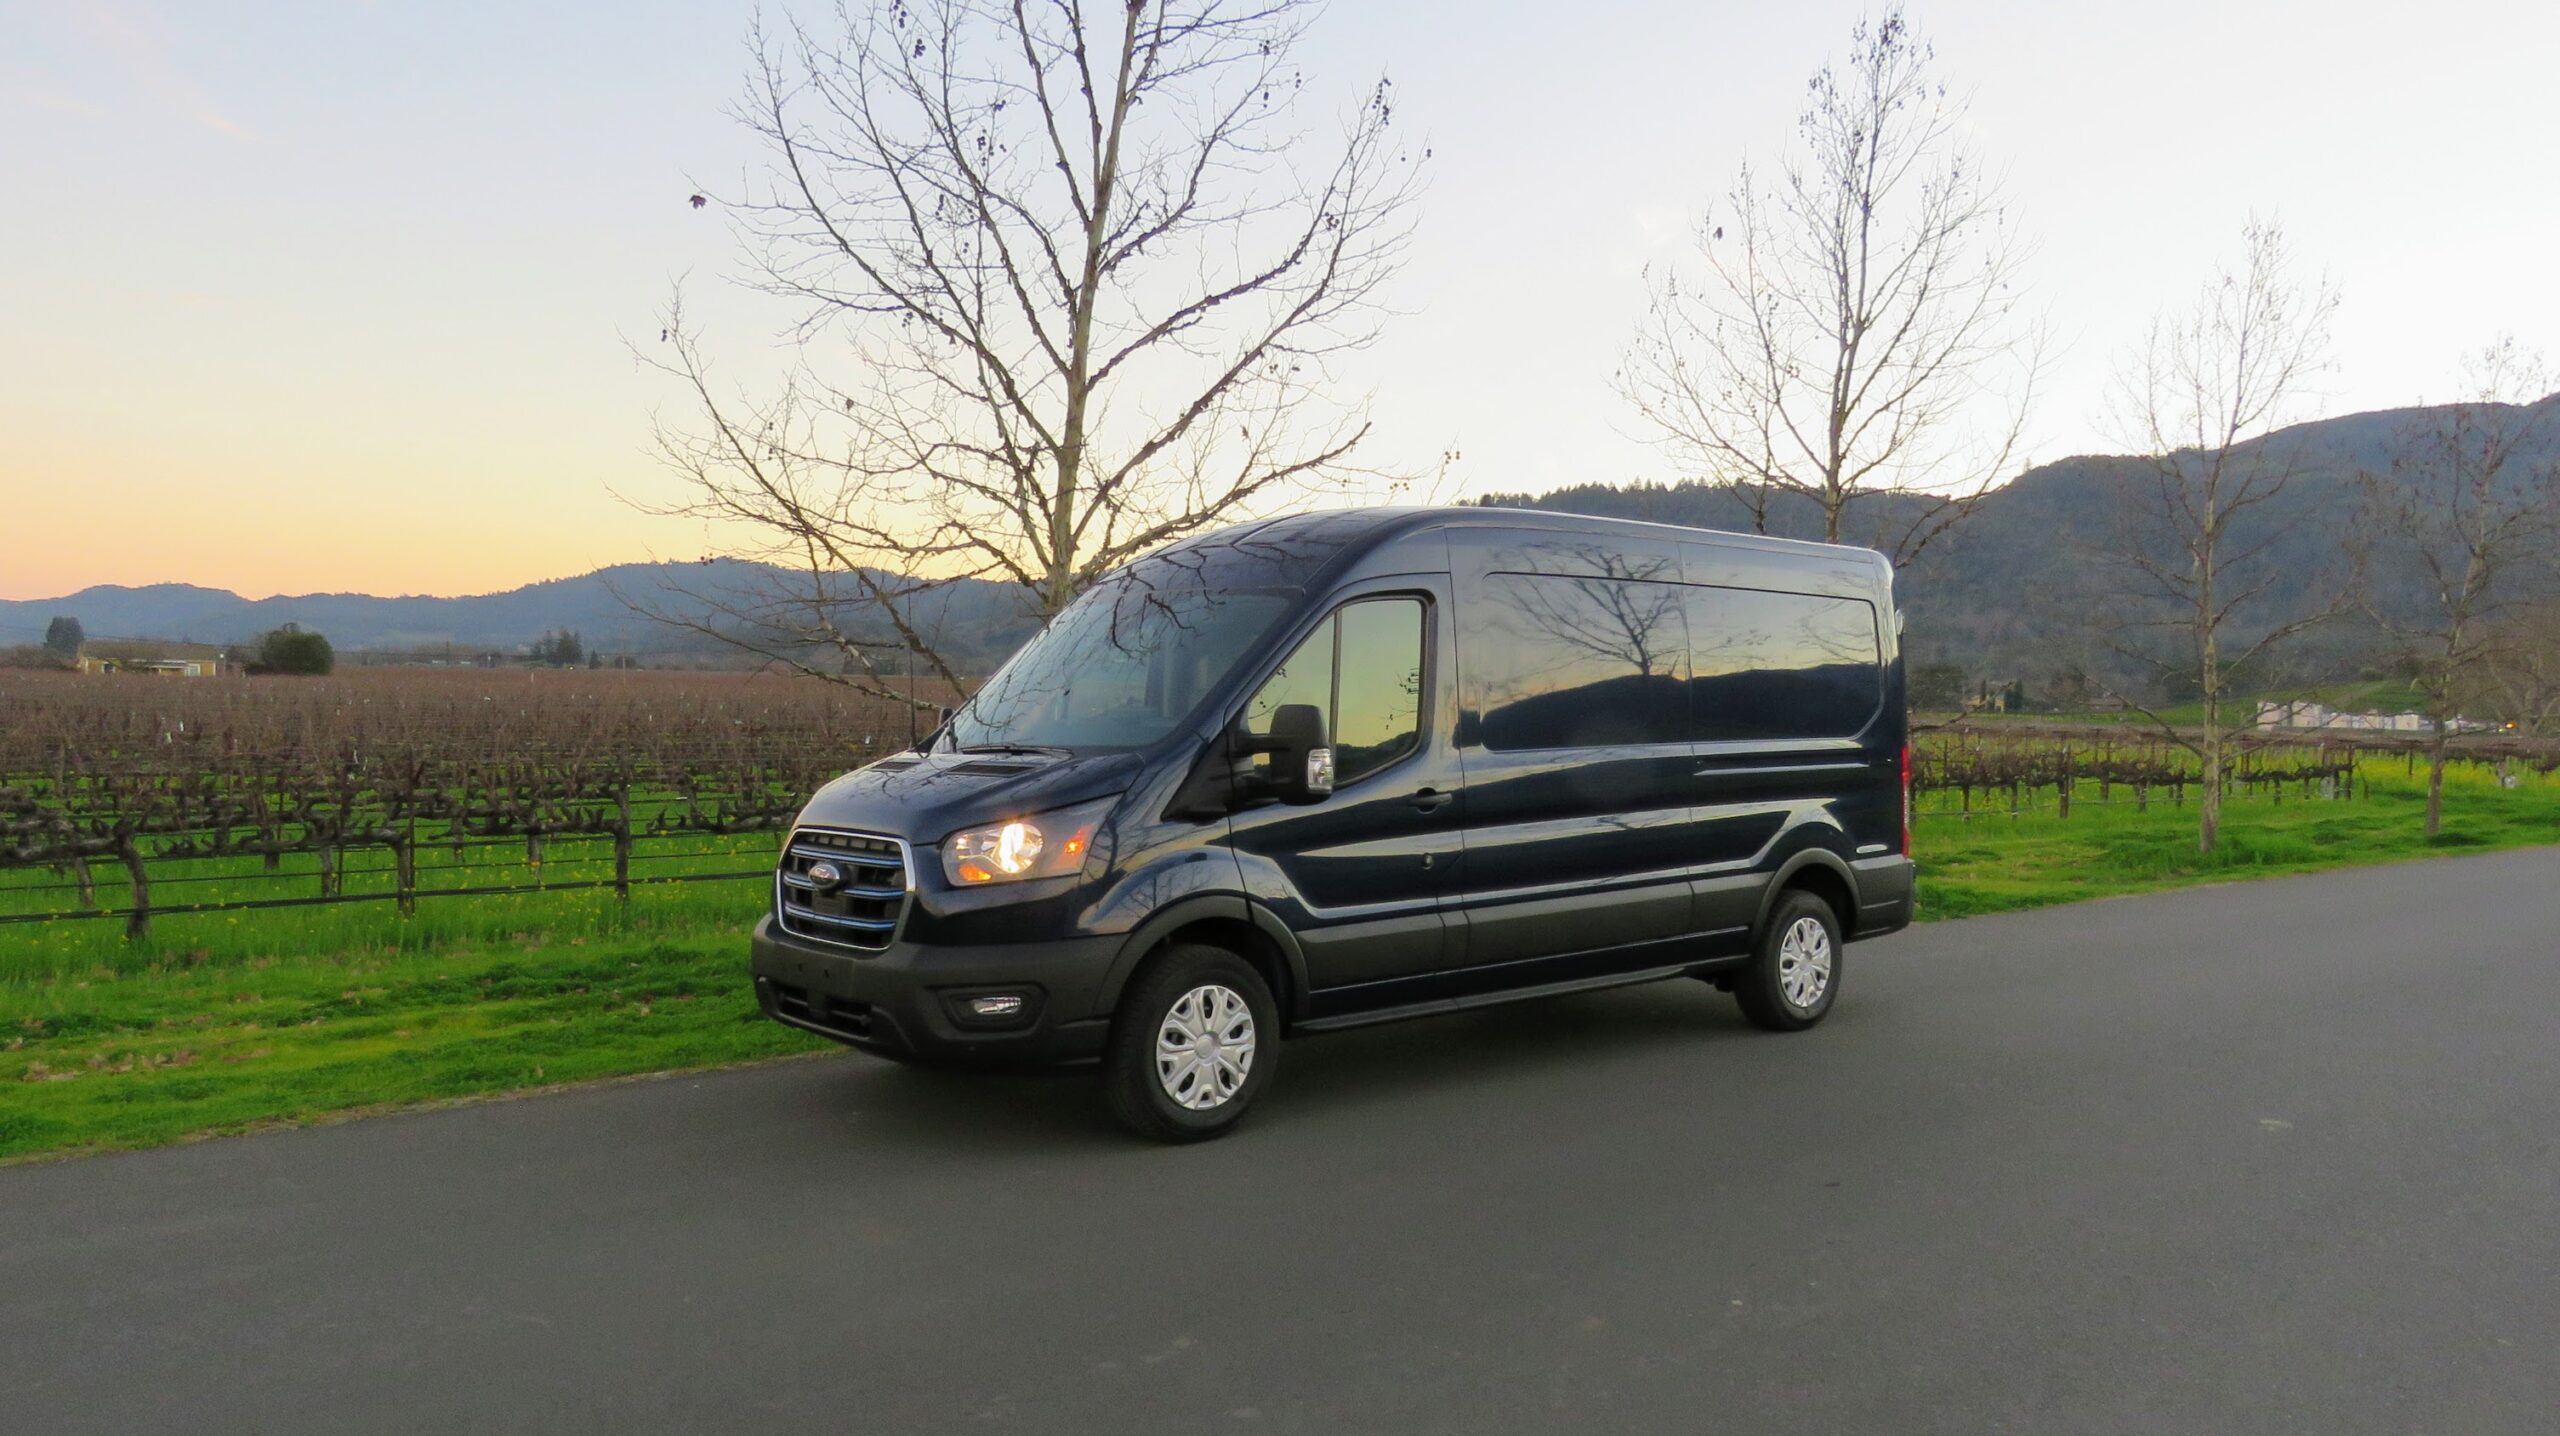 Quick spin: 2022 Ford E-Transit van makes all-electric fit for the upfitQuick spin: 2022 Ford E-Transit van makes all-electric fit for the upfit